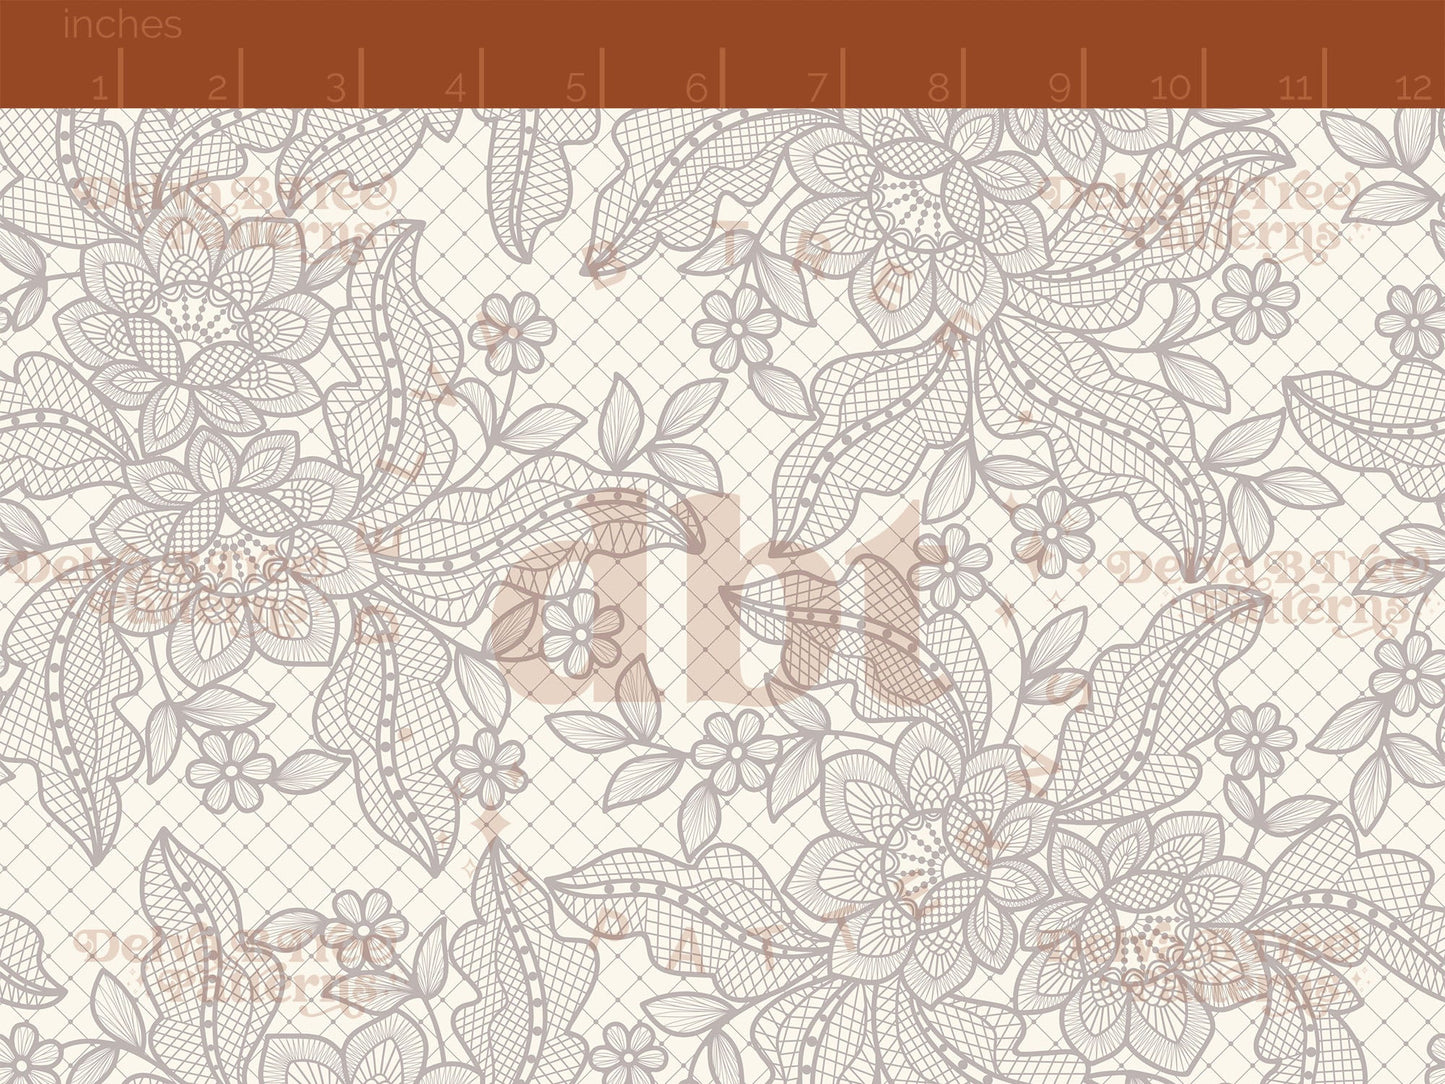 Pale Grey Umber flowers, leaves and faux lace netting on an off white / ivory / cream background seamless pattern scale digital file for small shops that make handmade products in small batches.